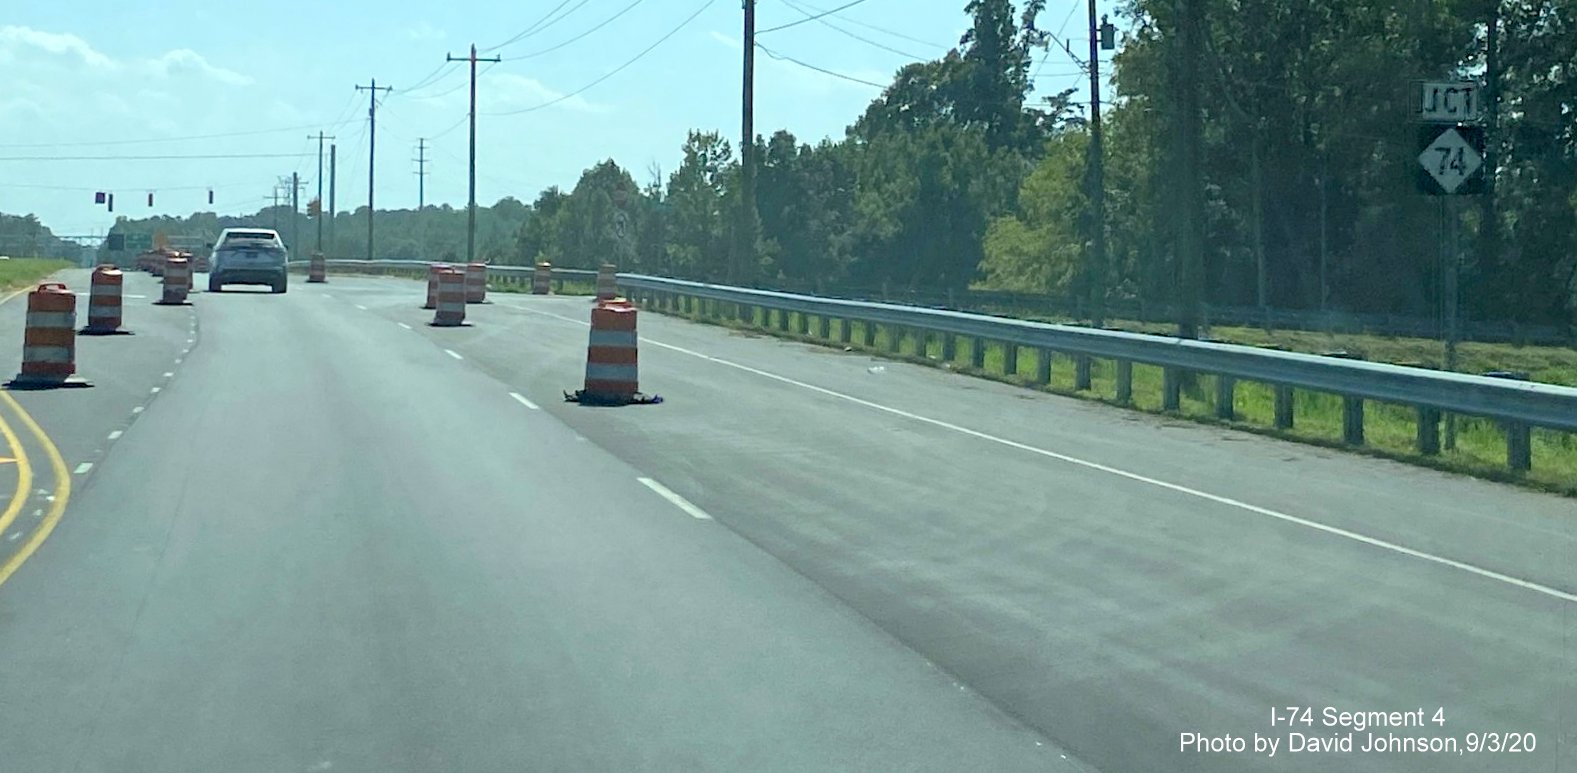 Image of recently placed Junction NC 74 trailblazer on US 158 West approaching soon to open interchange with Winston Salem Northern Beltway, by David Johnson September 2020